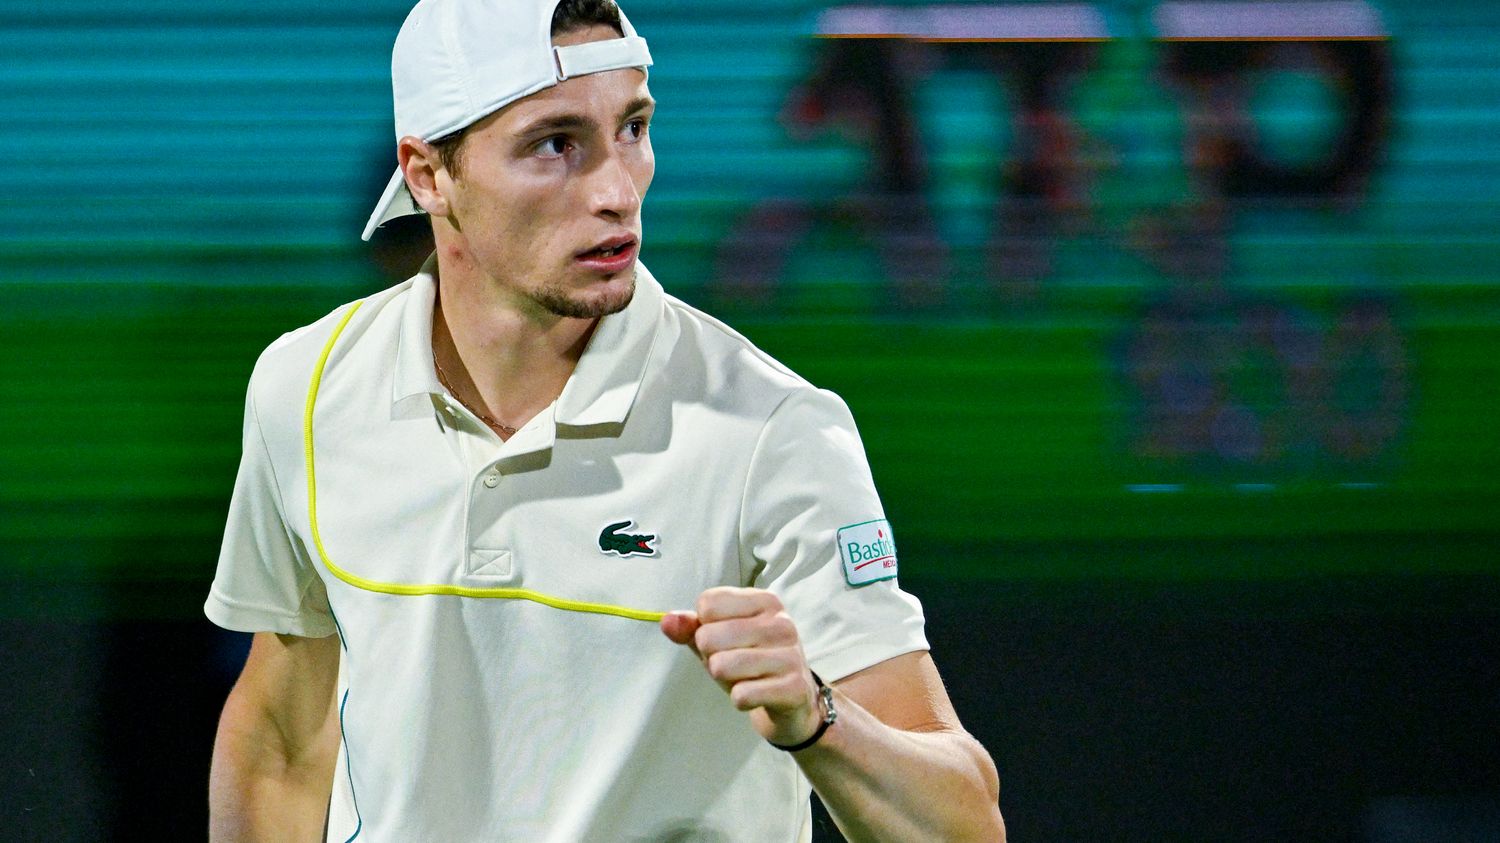 Tennis: Ugo Humbert defeated Daniil Medvedev in the semi-finals of Dubai and entered the top 15 in the world